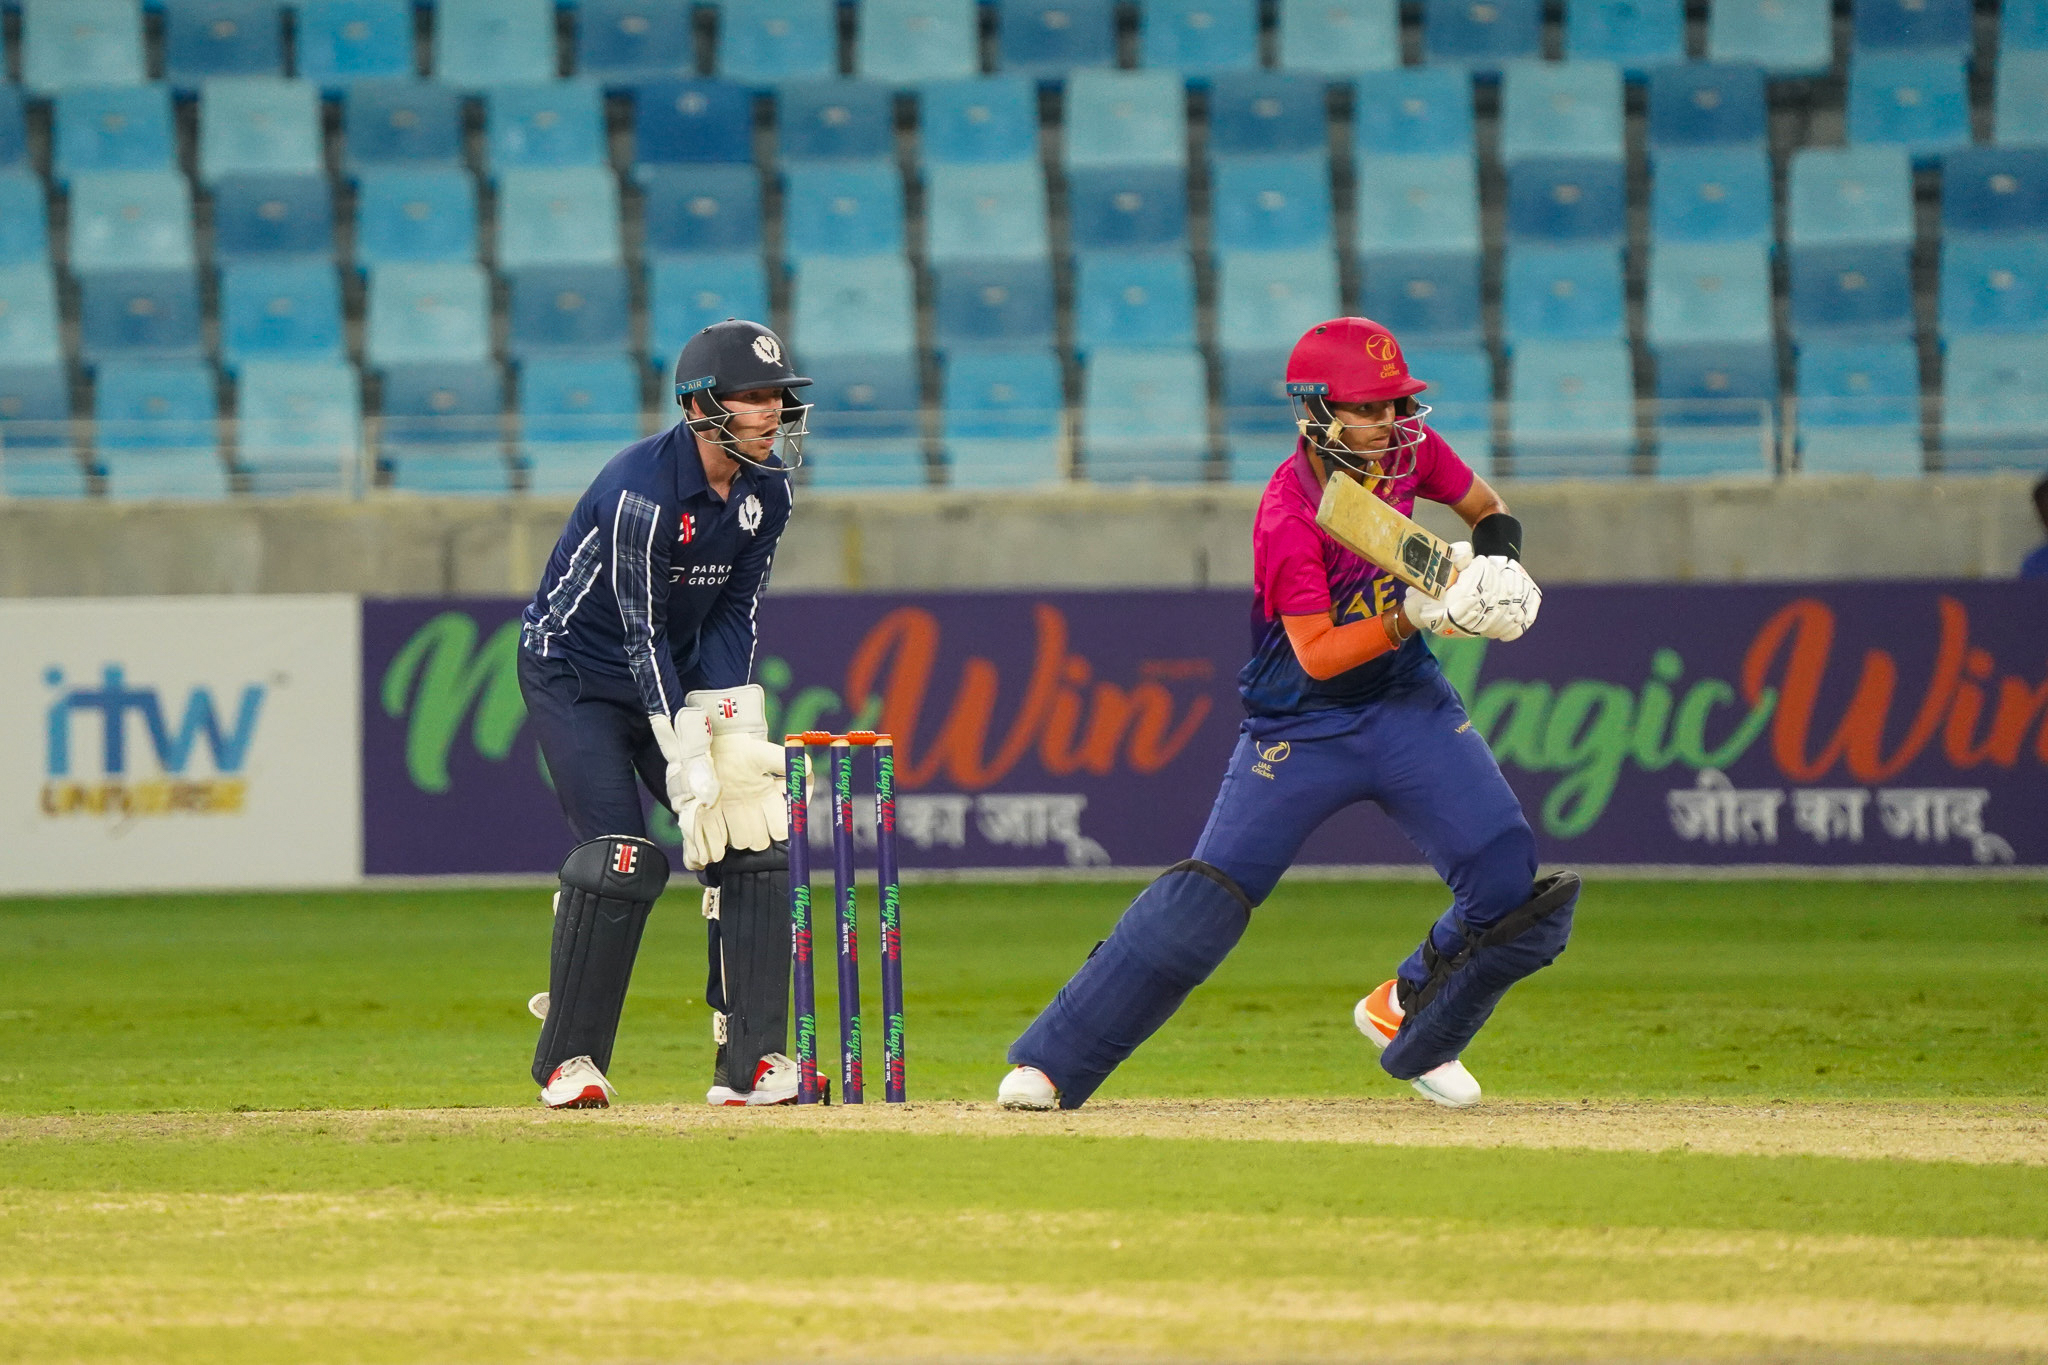 SCOTLAND FALL TO UAE IN FIRST T20 INTERNATIONAL